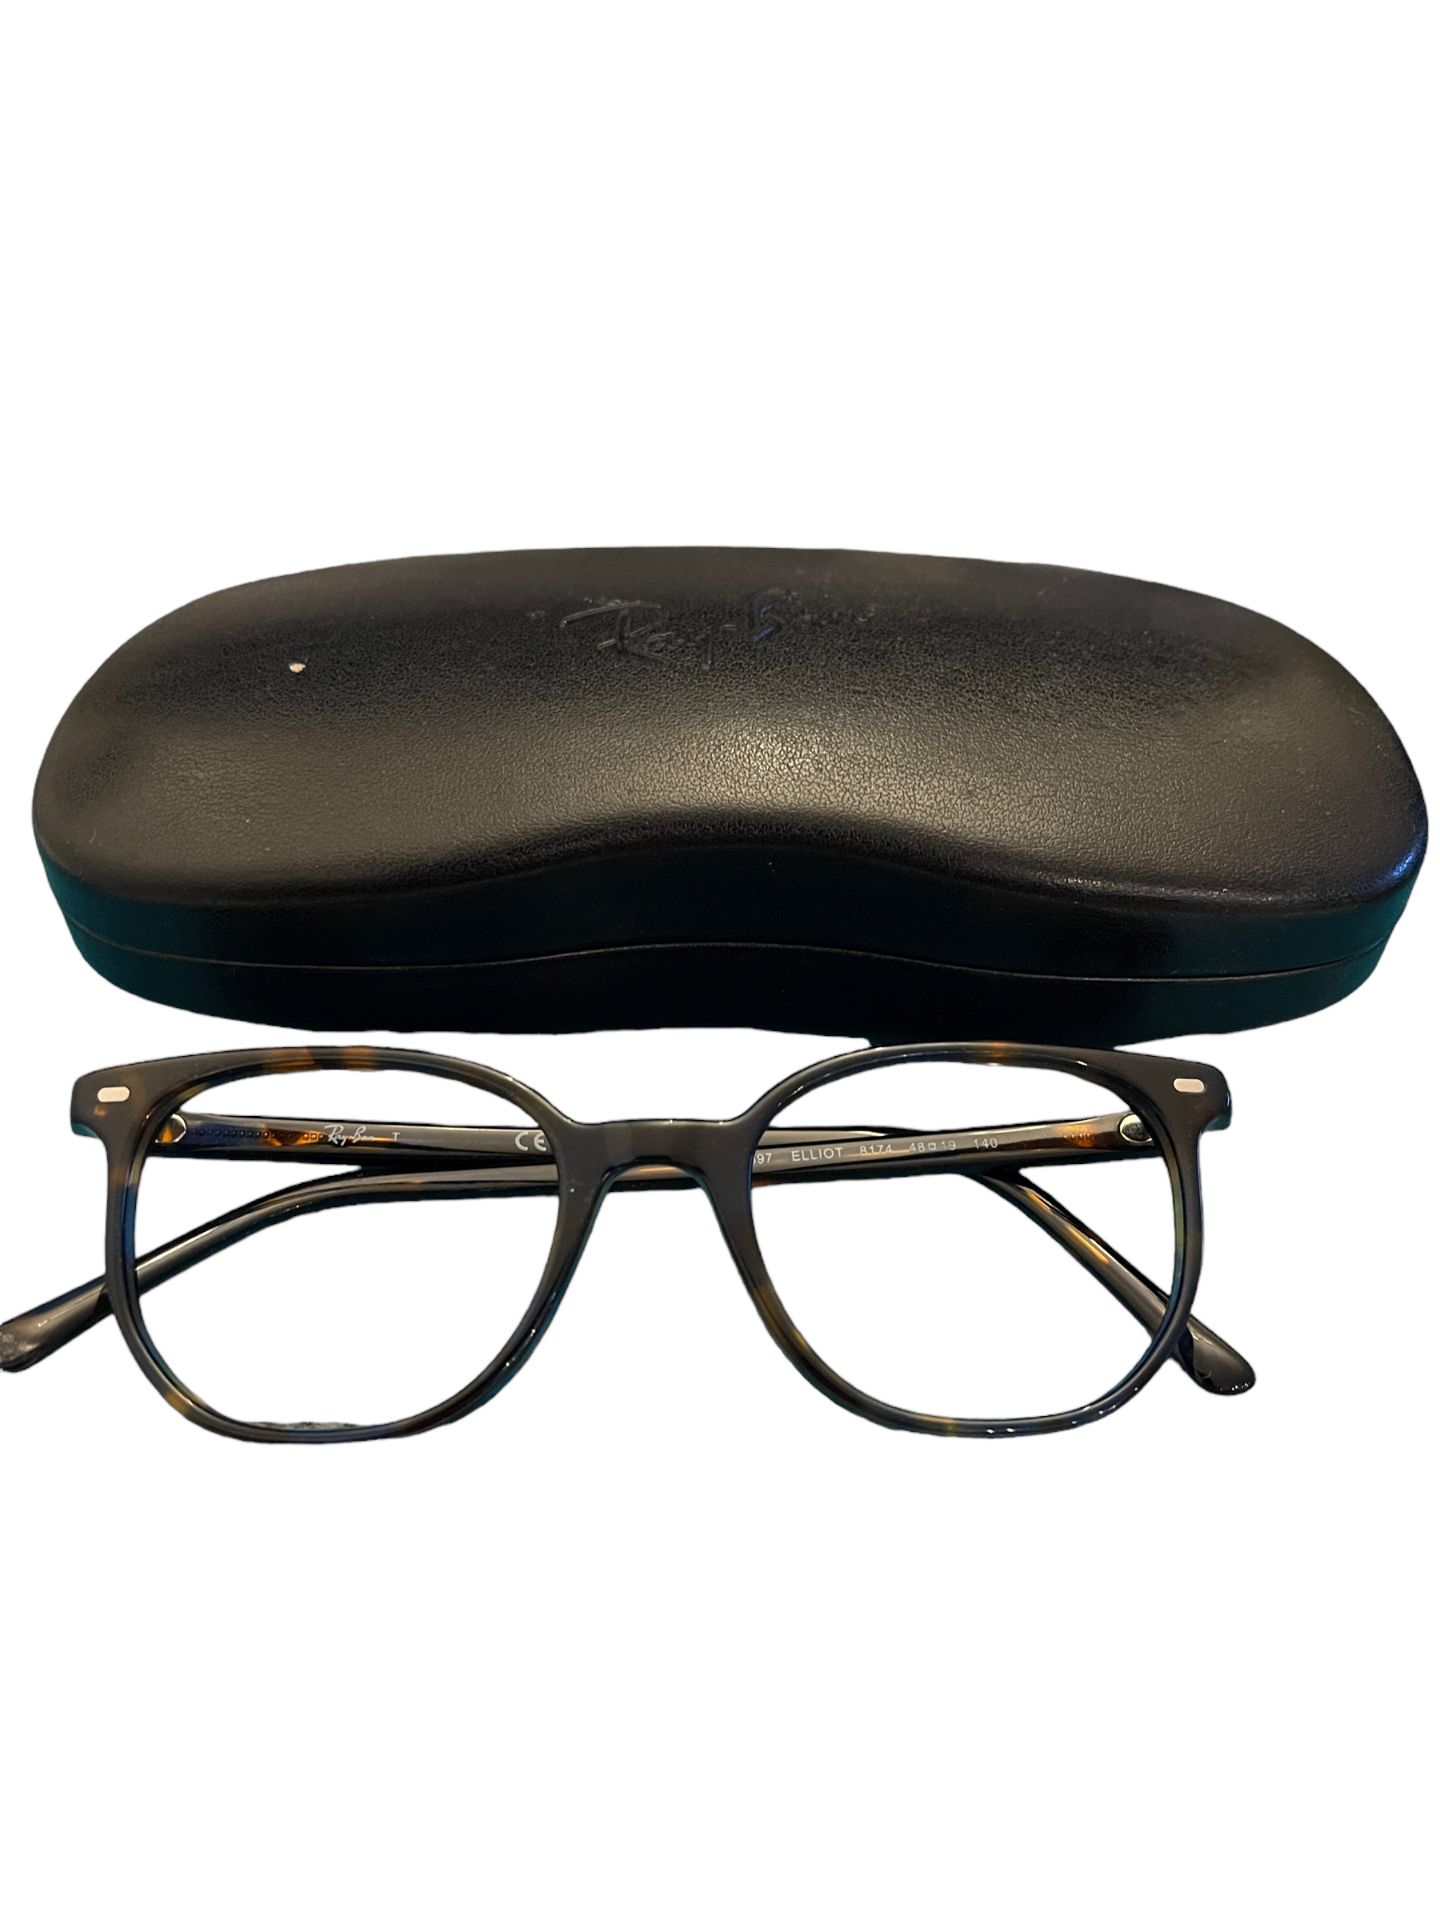 PROSCRIPTION RAY BAN FRAMES WITH CASE X DEMO